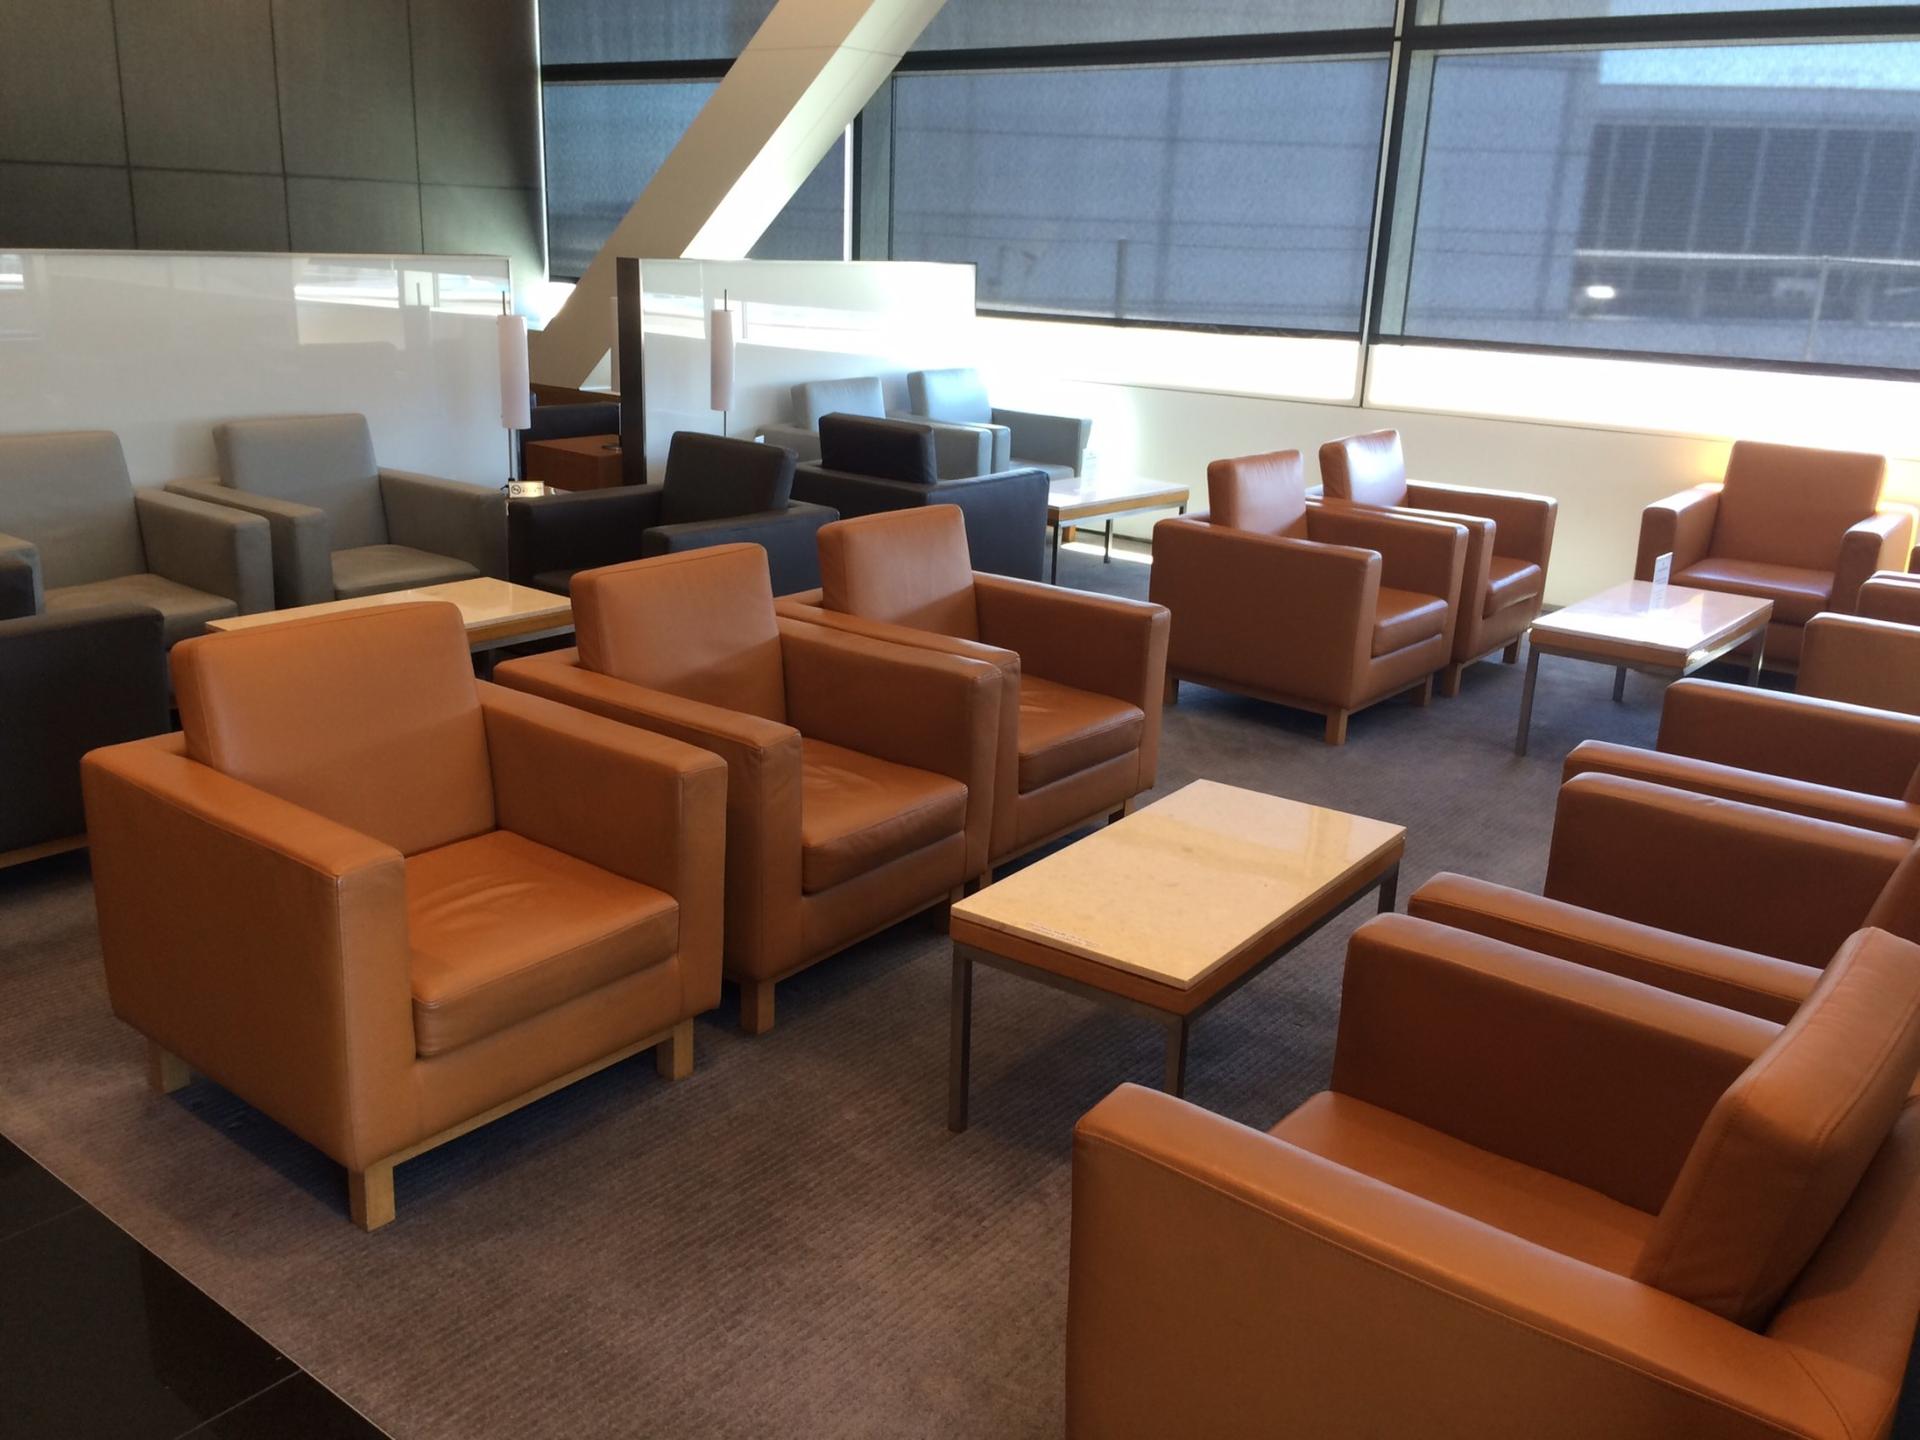 Cathay Pacific First and Business Class Lounge image 69 of 74